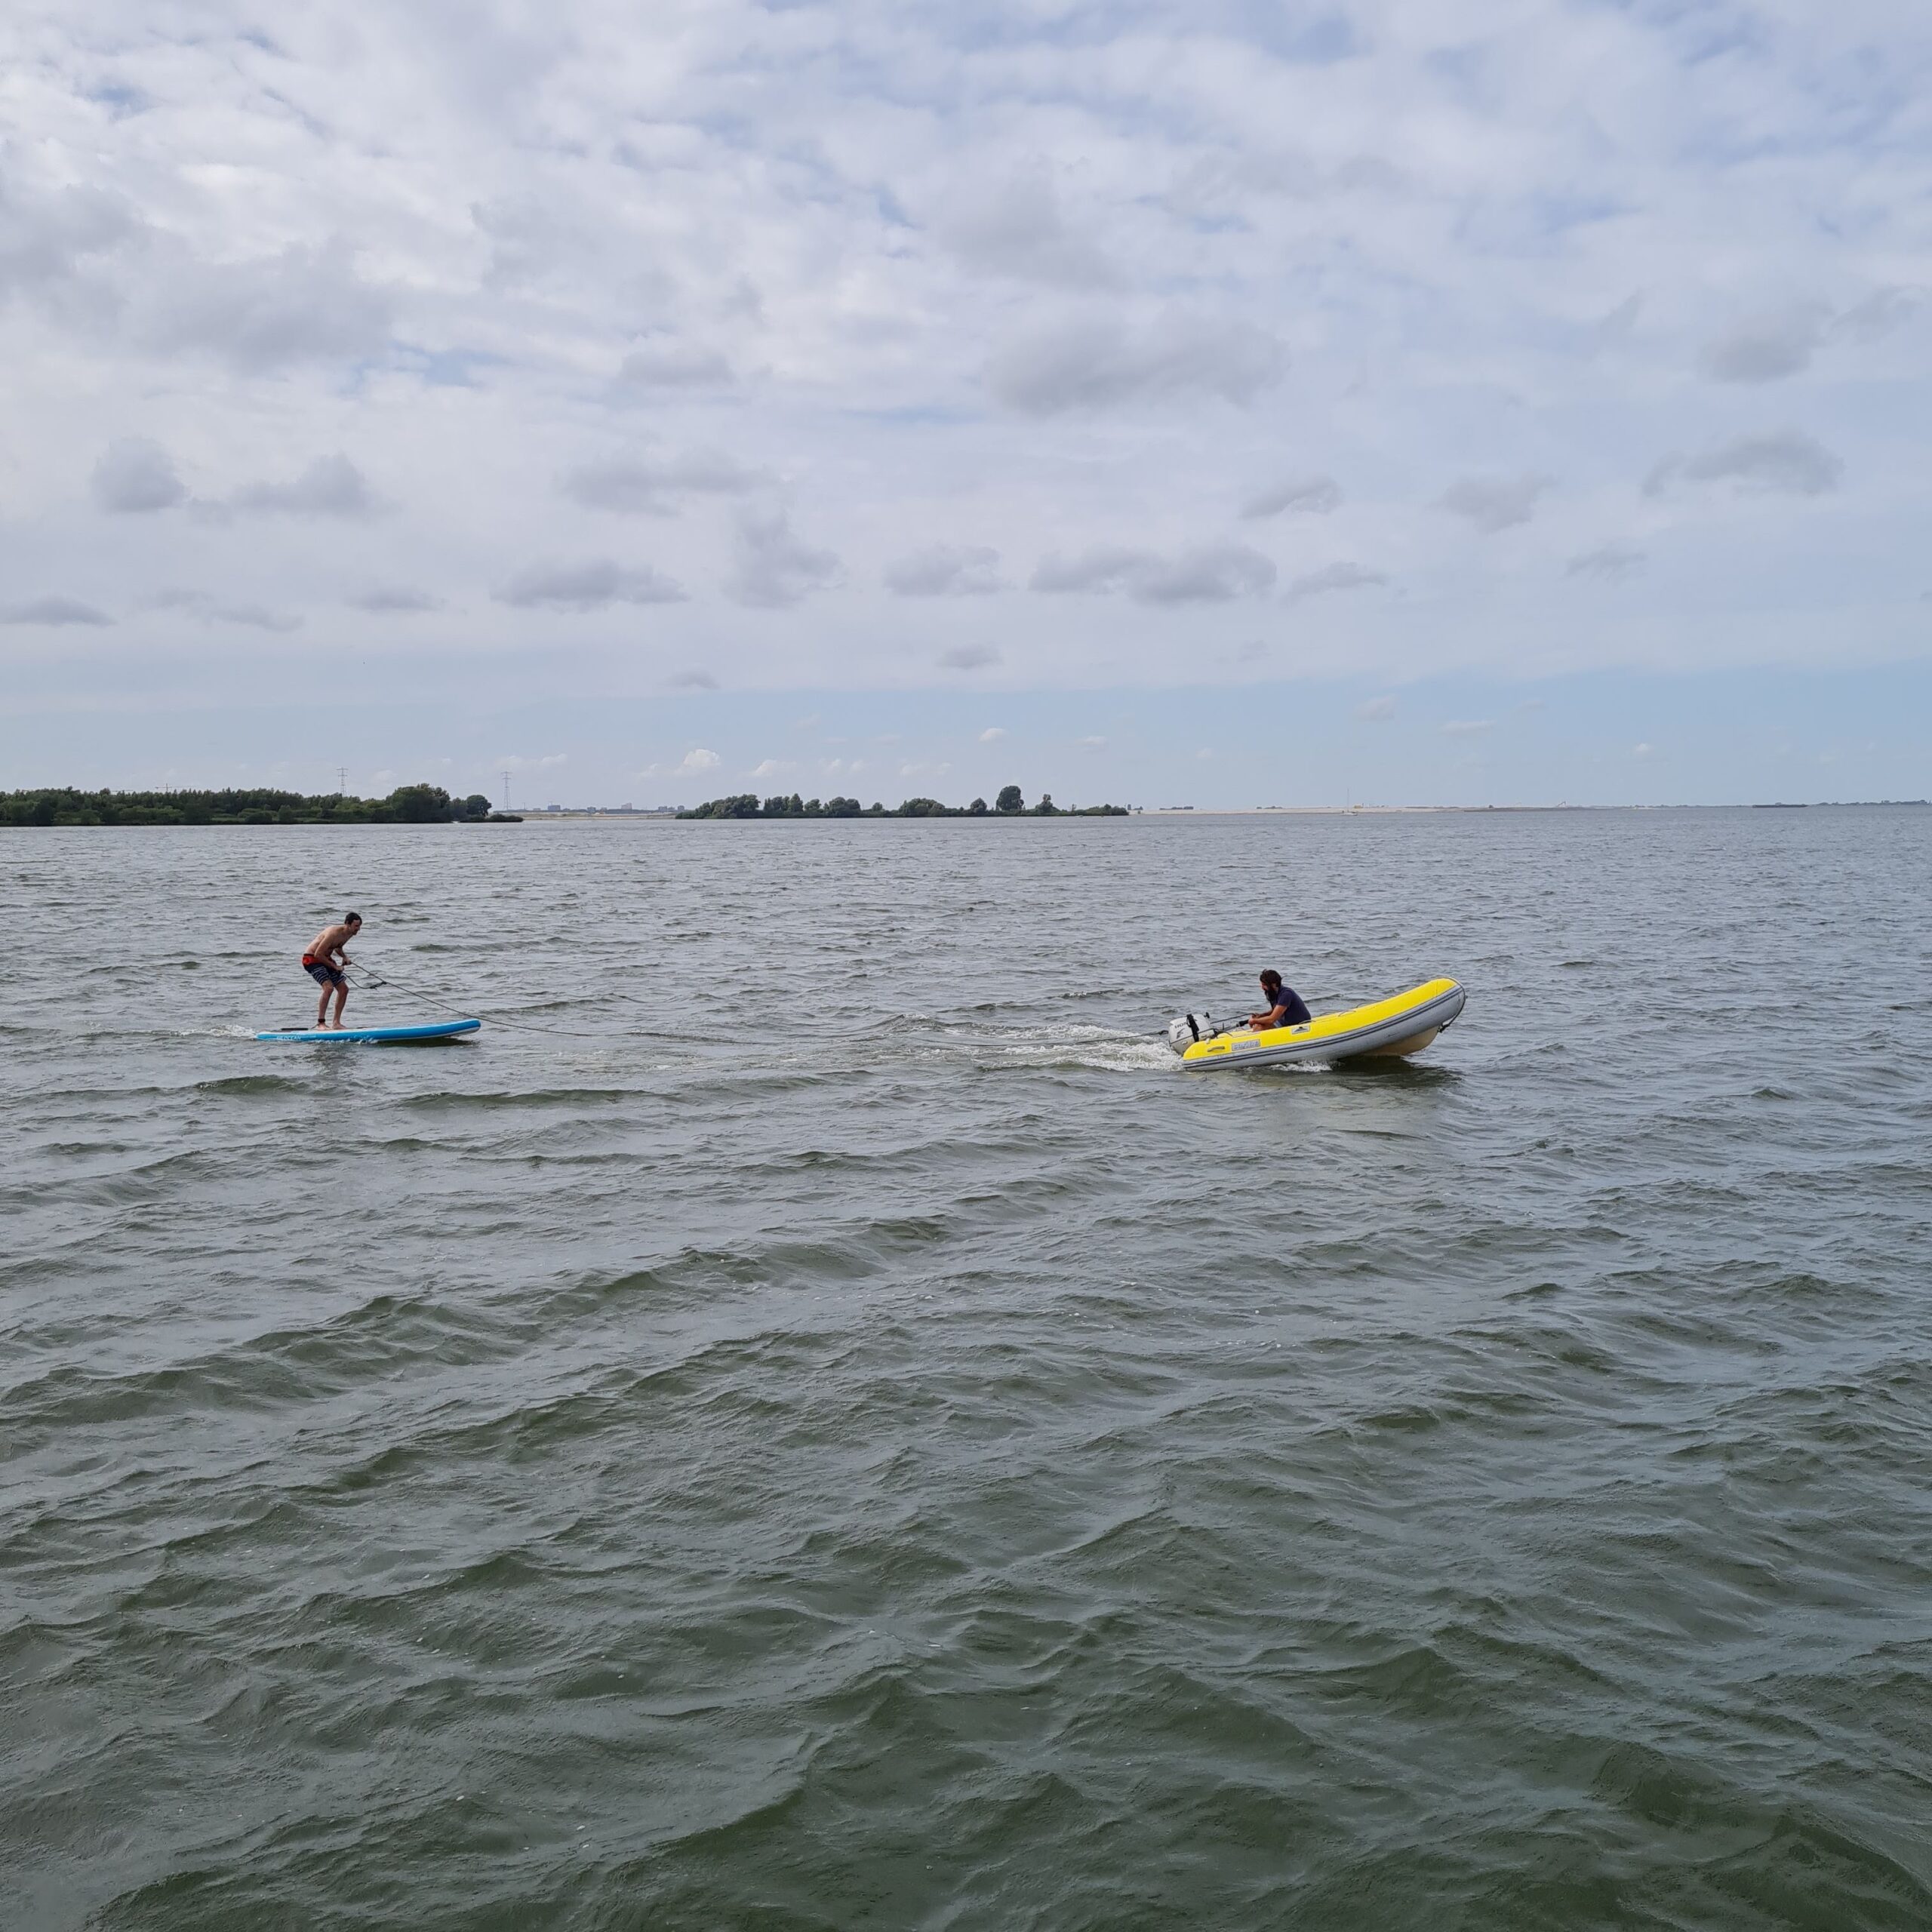 Paddleboarder and a dinghy sailor enjoying water sports on the choppy waters of Markermeer.